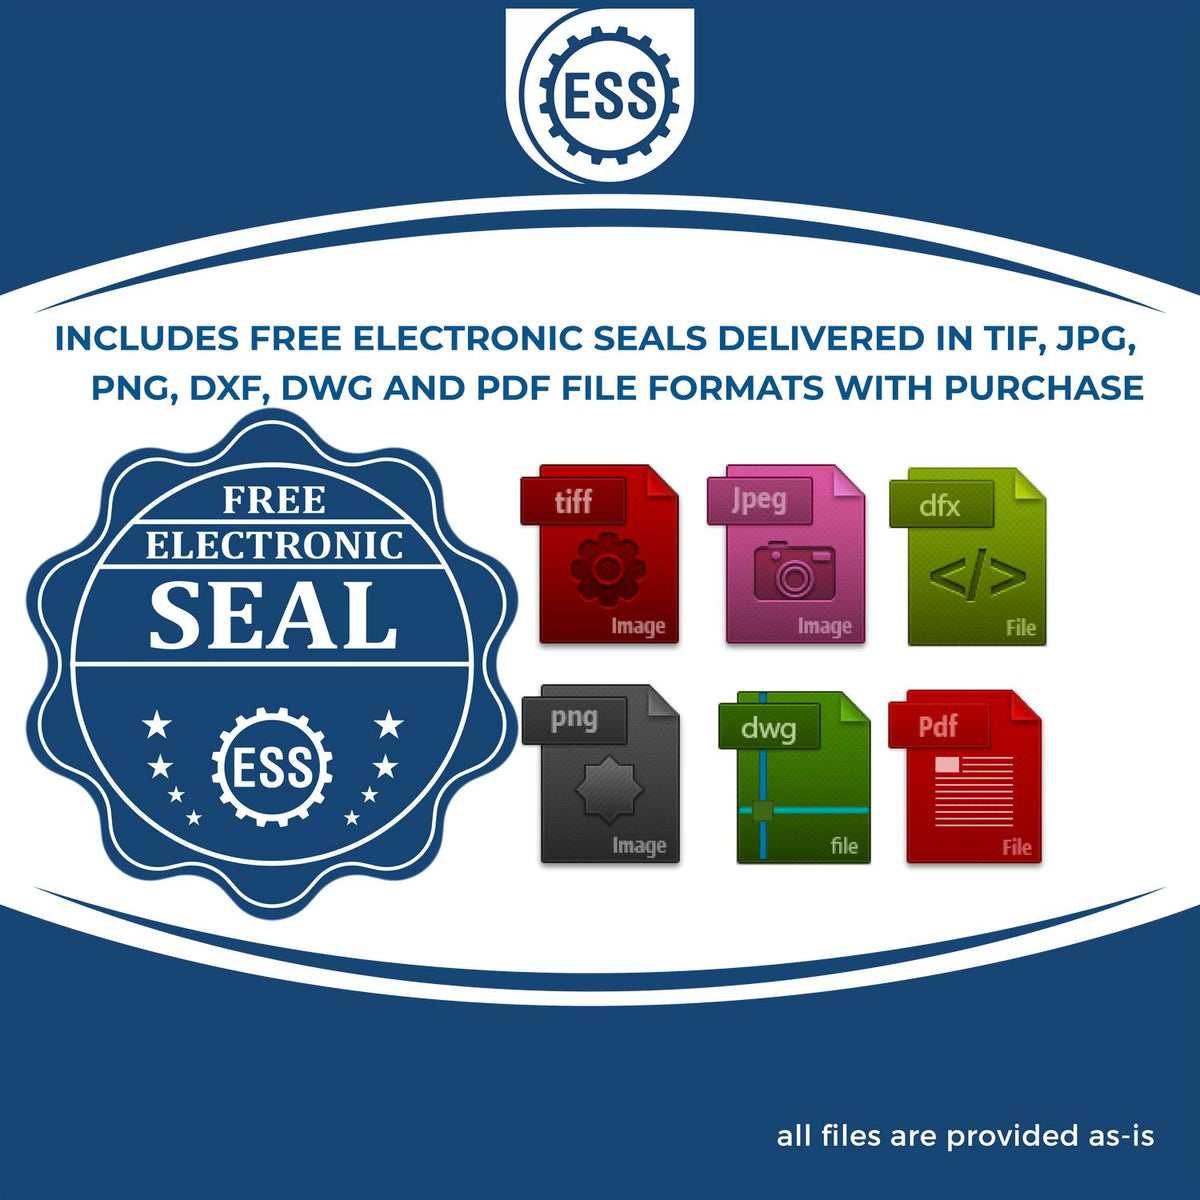 An infographic for the free electronic seal for the Hybrid Washington Architect Seal illustrating the different file type icons such as DXF, DWG, TIF, JPG and PNG.